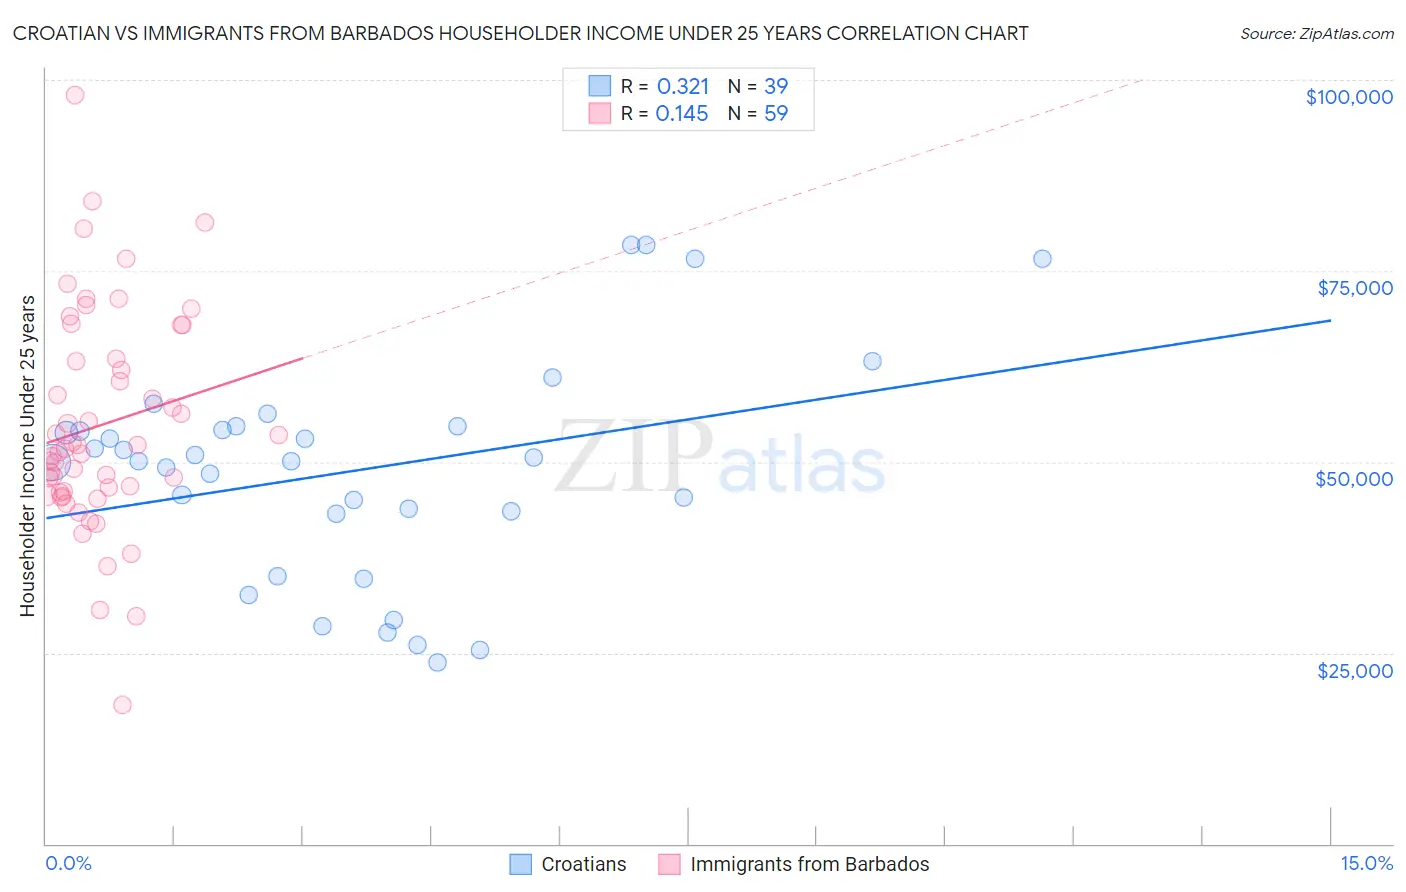 Croatian vs Immigrants from Barbados Householder Income Under 25 years